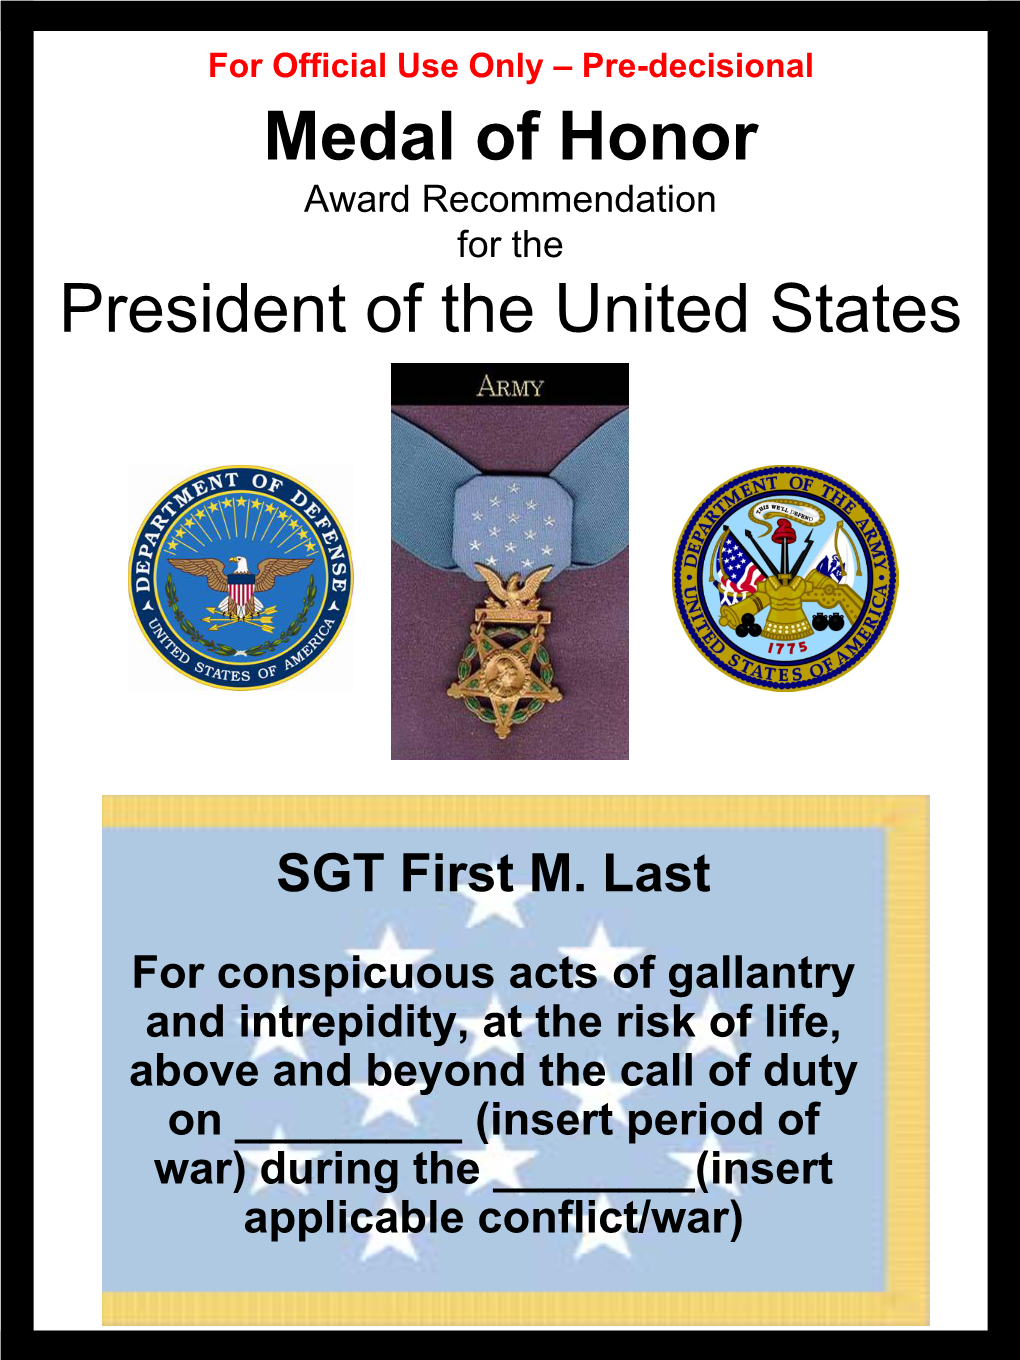 Medal of Honor Award Recommendation for the President of the United States